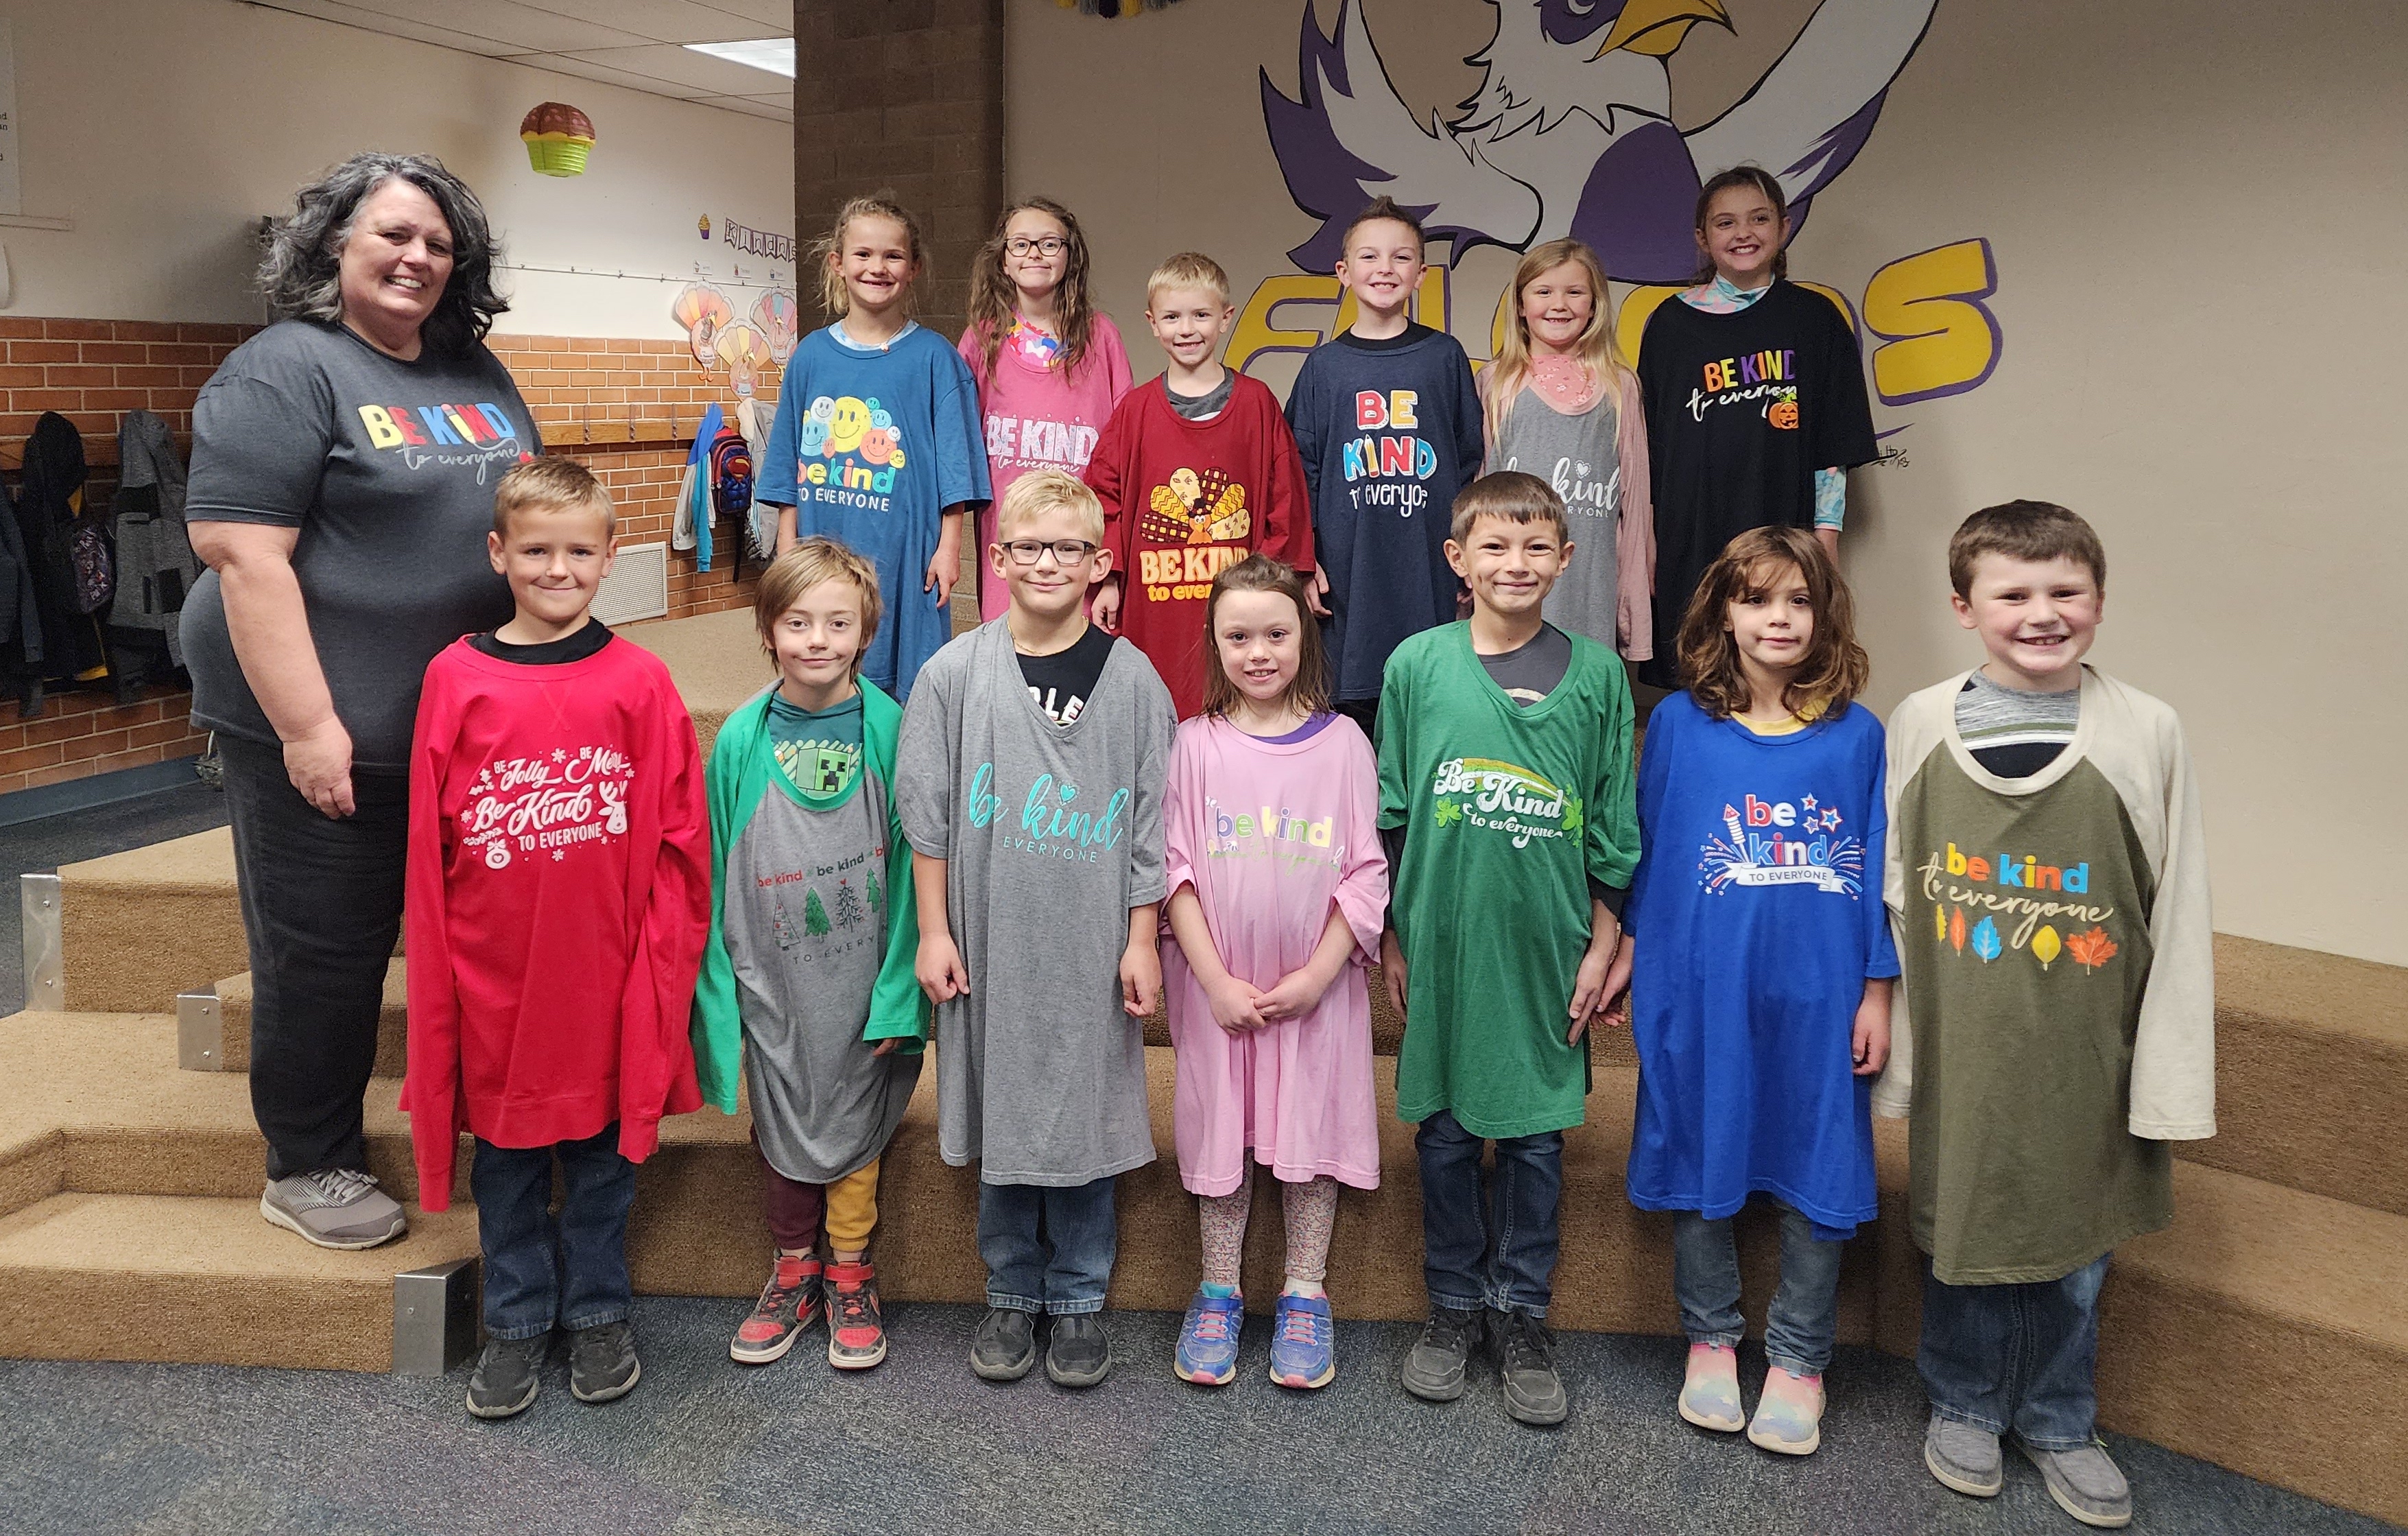 Today is World Kindness day. Ms. Davis has a kindness shirt for every occasion and every student in her class apparently! The students love her kindness shirts. They are a good reminder to be kind to all every day, not just on kindness day. Thank you for your example Ms. Davis!